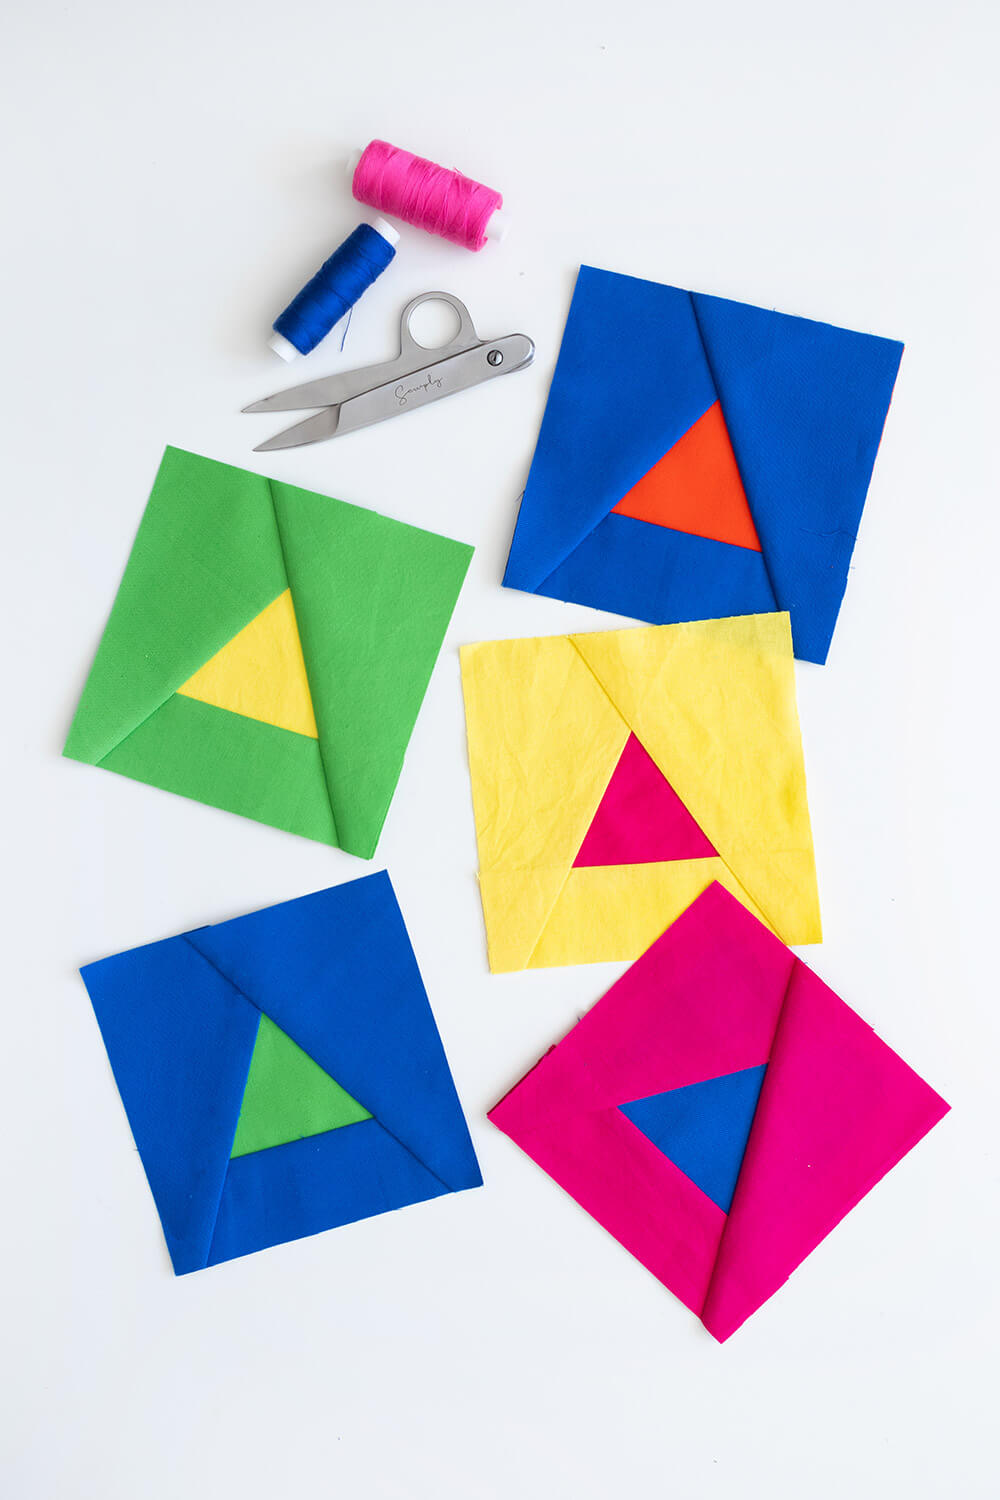 Introduction to Foundation Paper Piecing